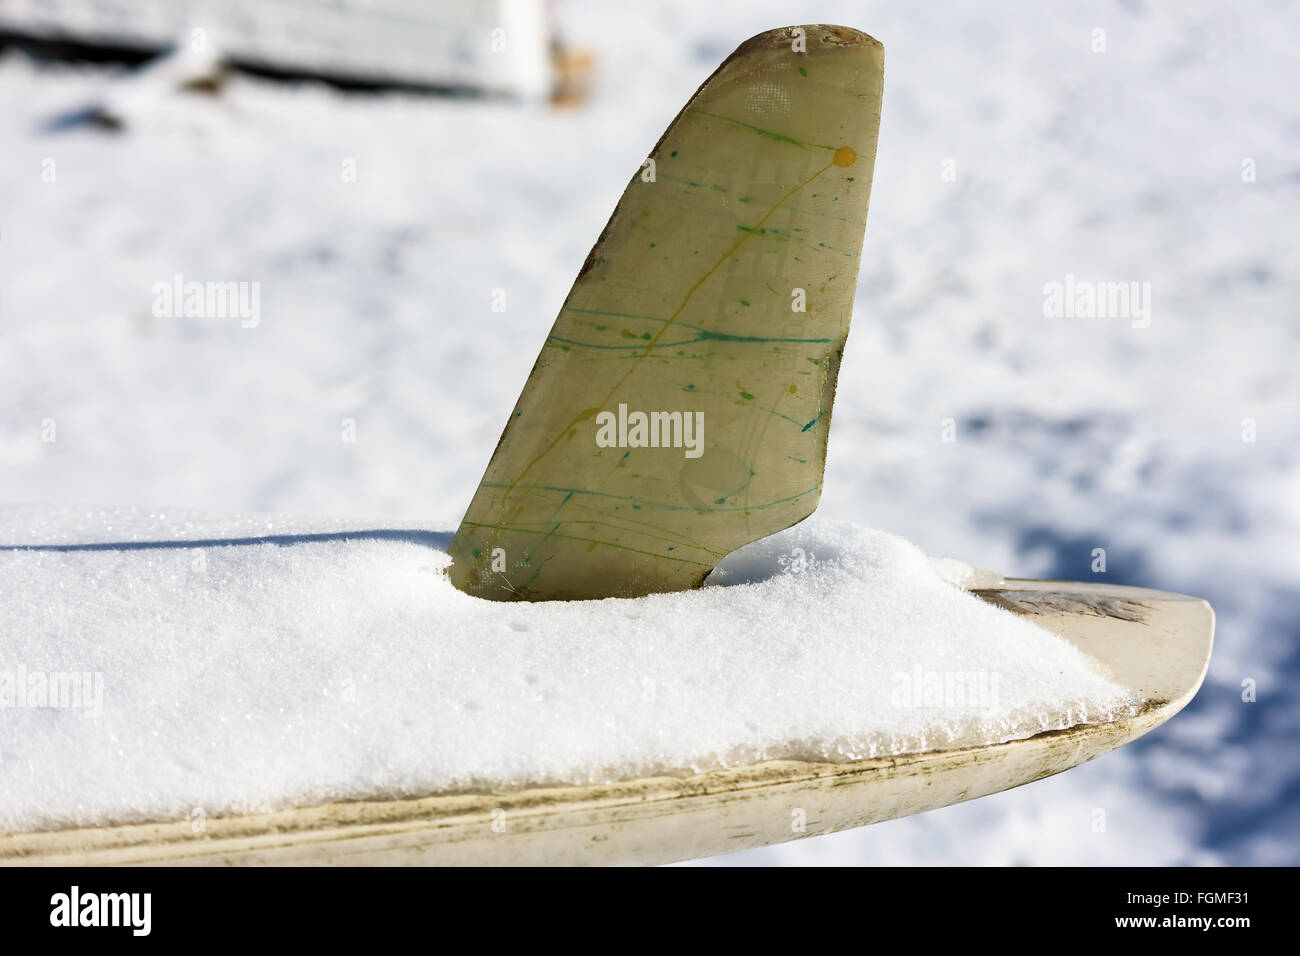 Ryd, Sweden - February 16, 2016: The aft part of a surfboard covered by ice and snow in winter. Logo partly visible on fin. Stock Photo